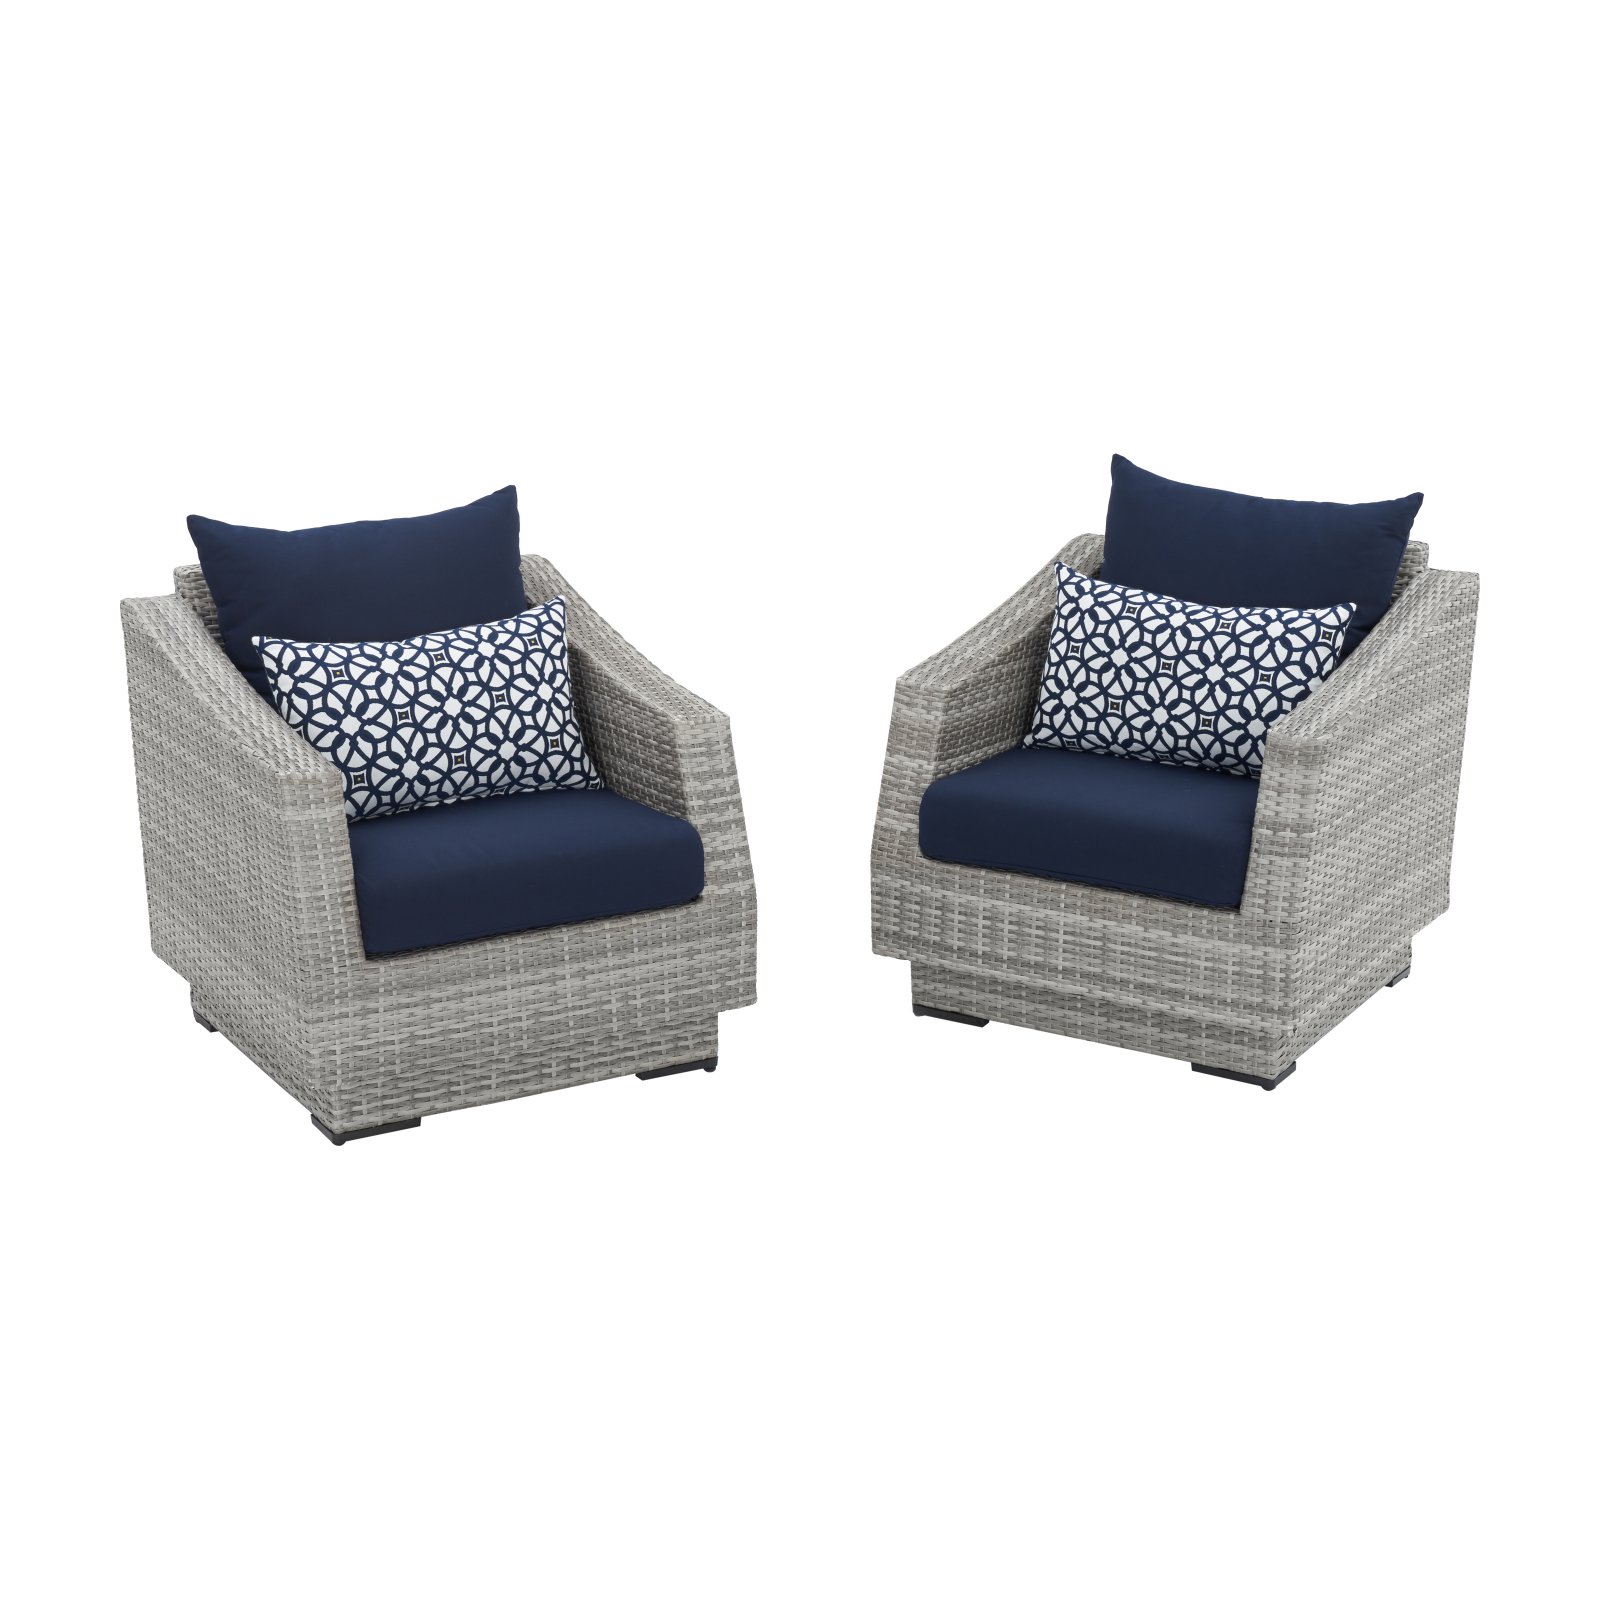 RST Brands Cannes Sunbrella Club Chair - Set of 2 - image 1 of 11